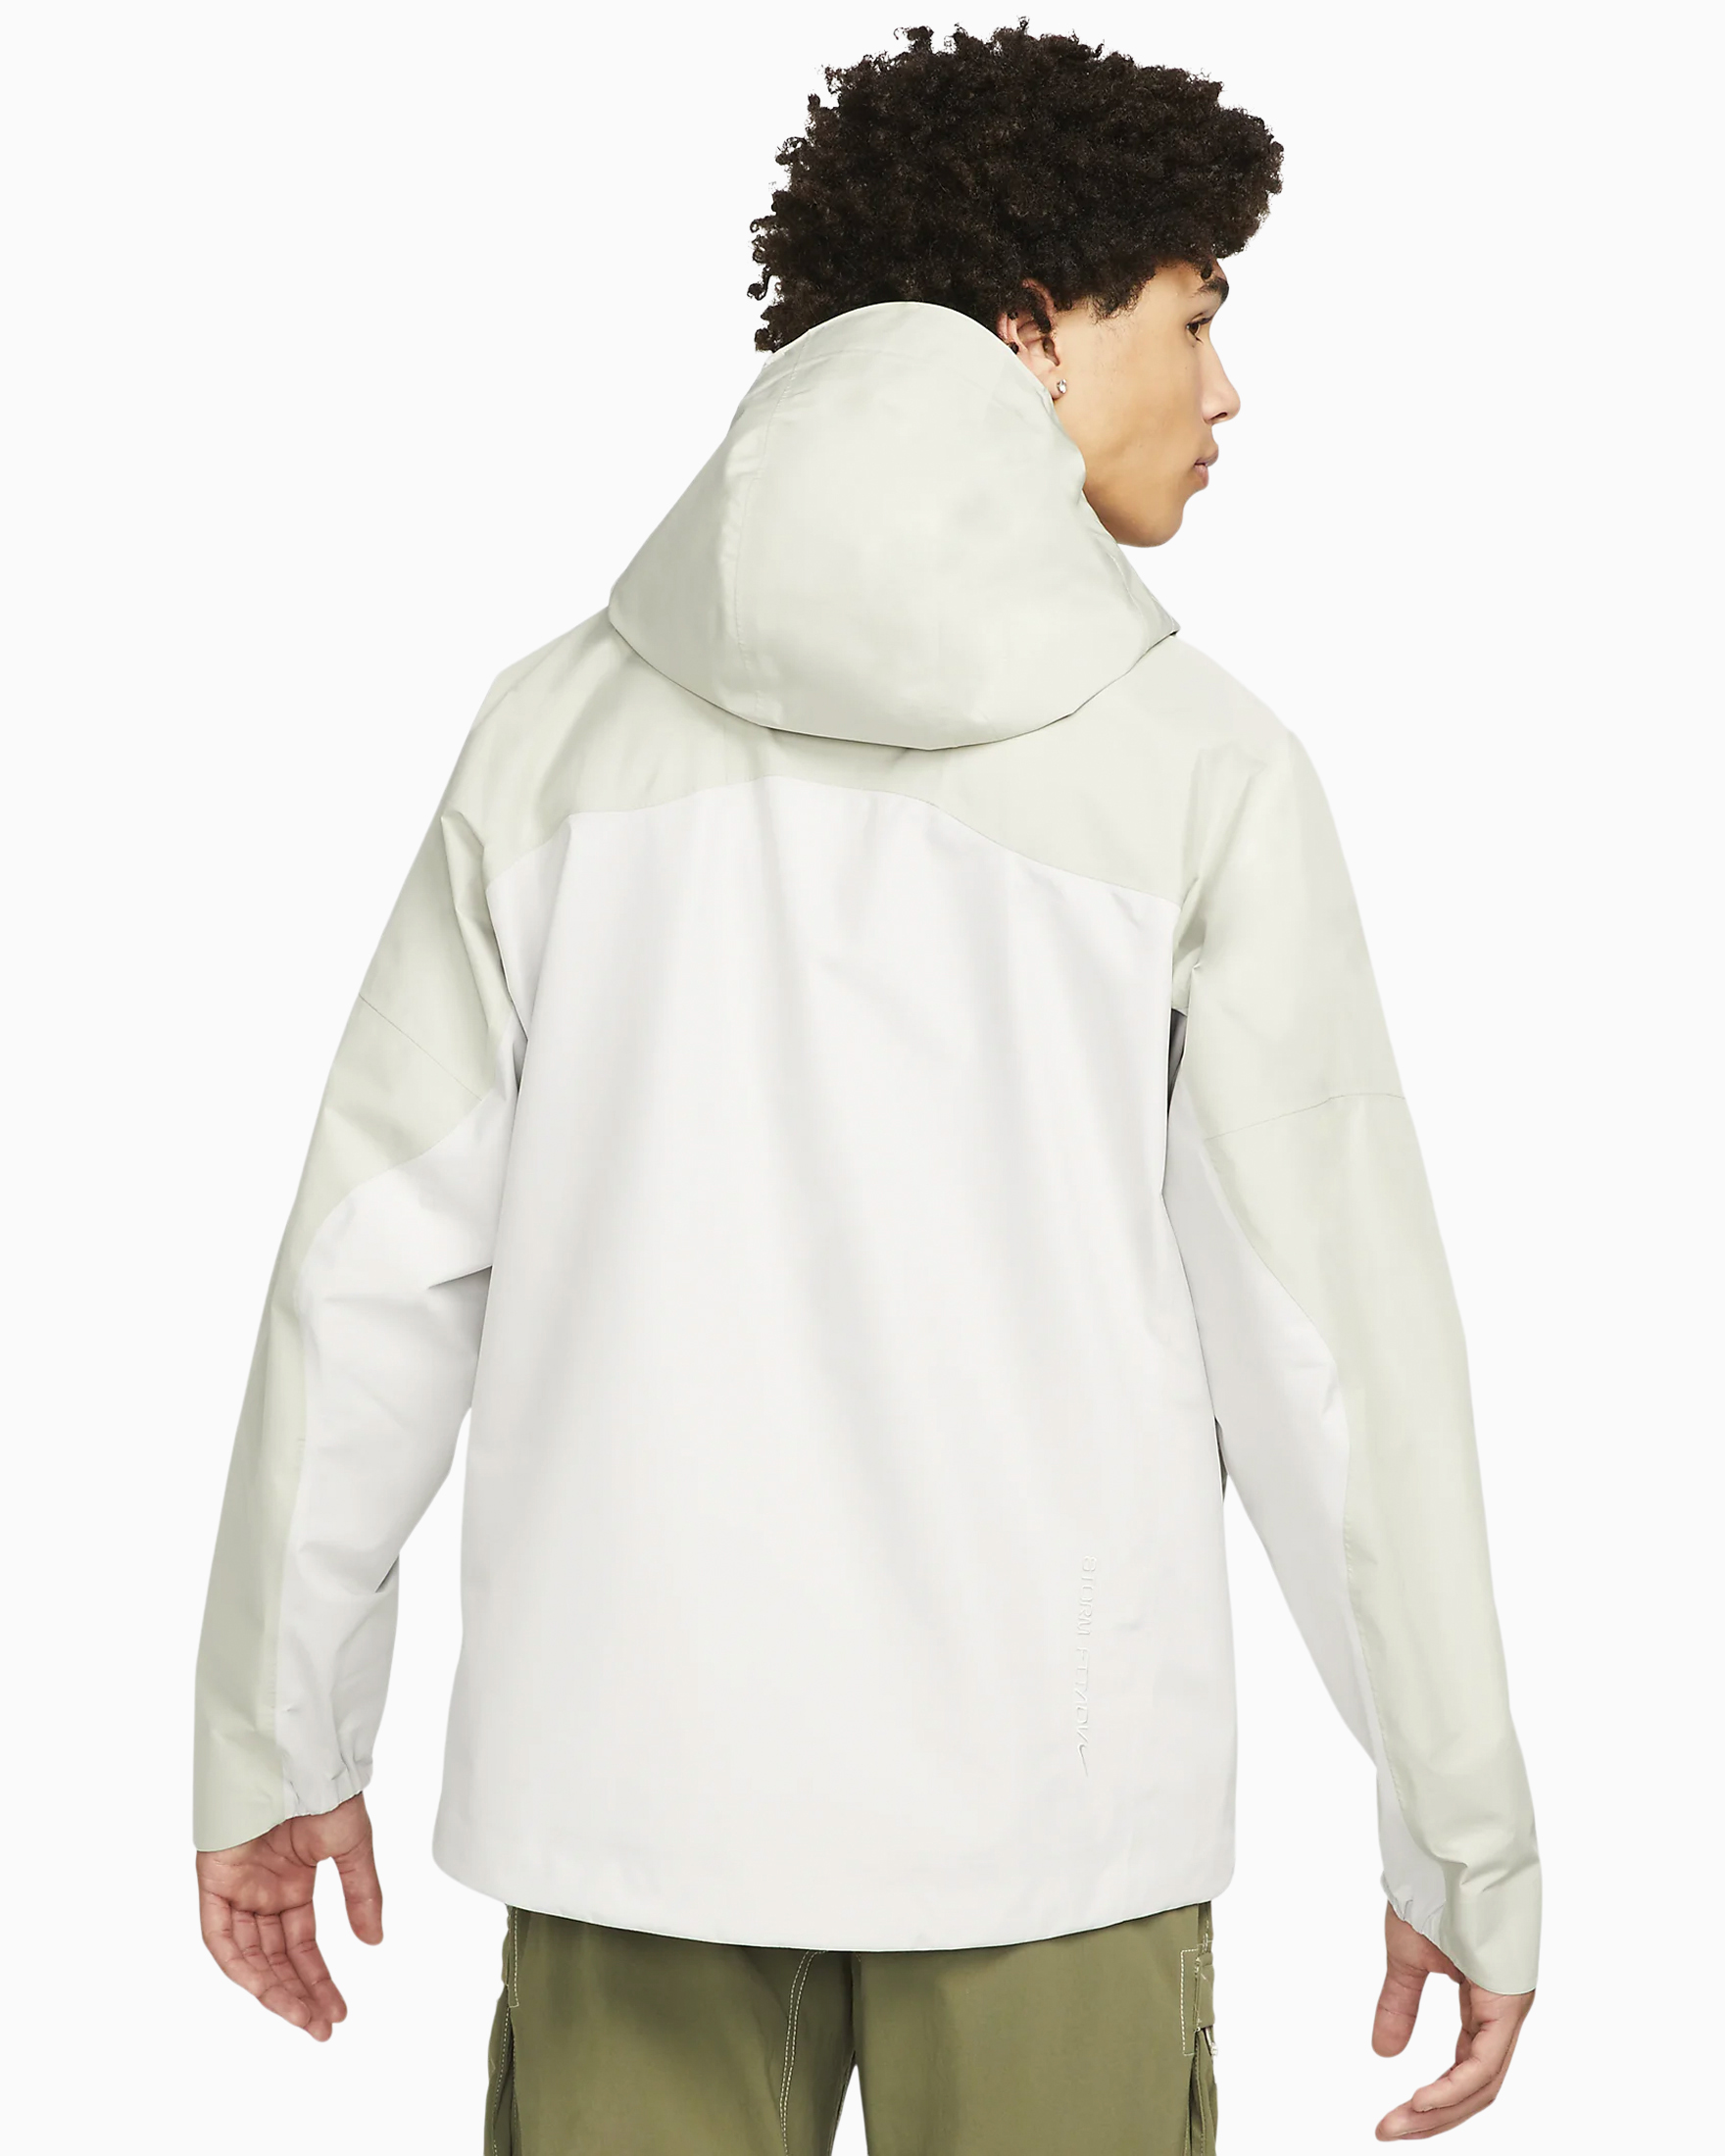 ACG Storm-FIT ADV Chain of Craters Jacket Nike Outerwear